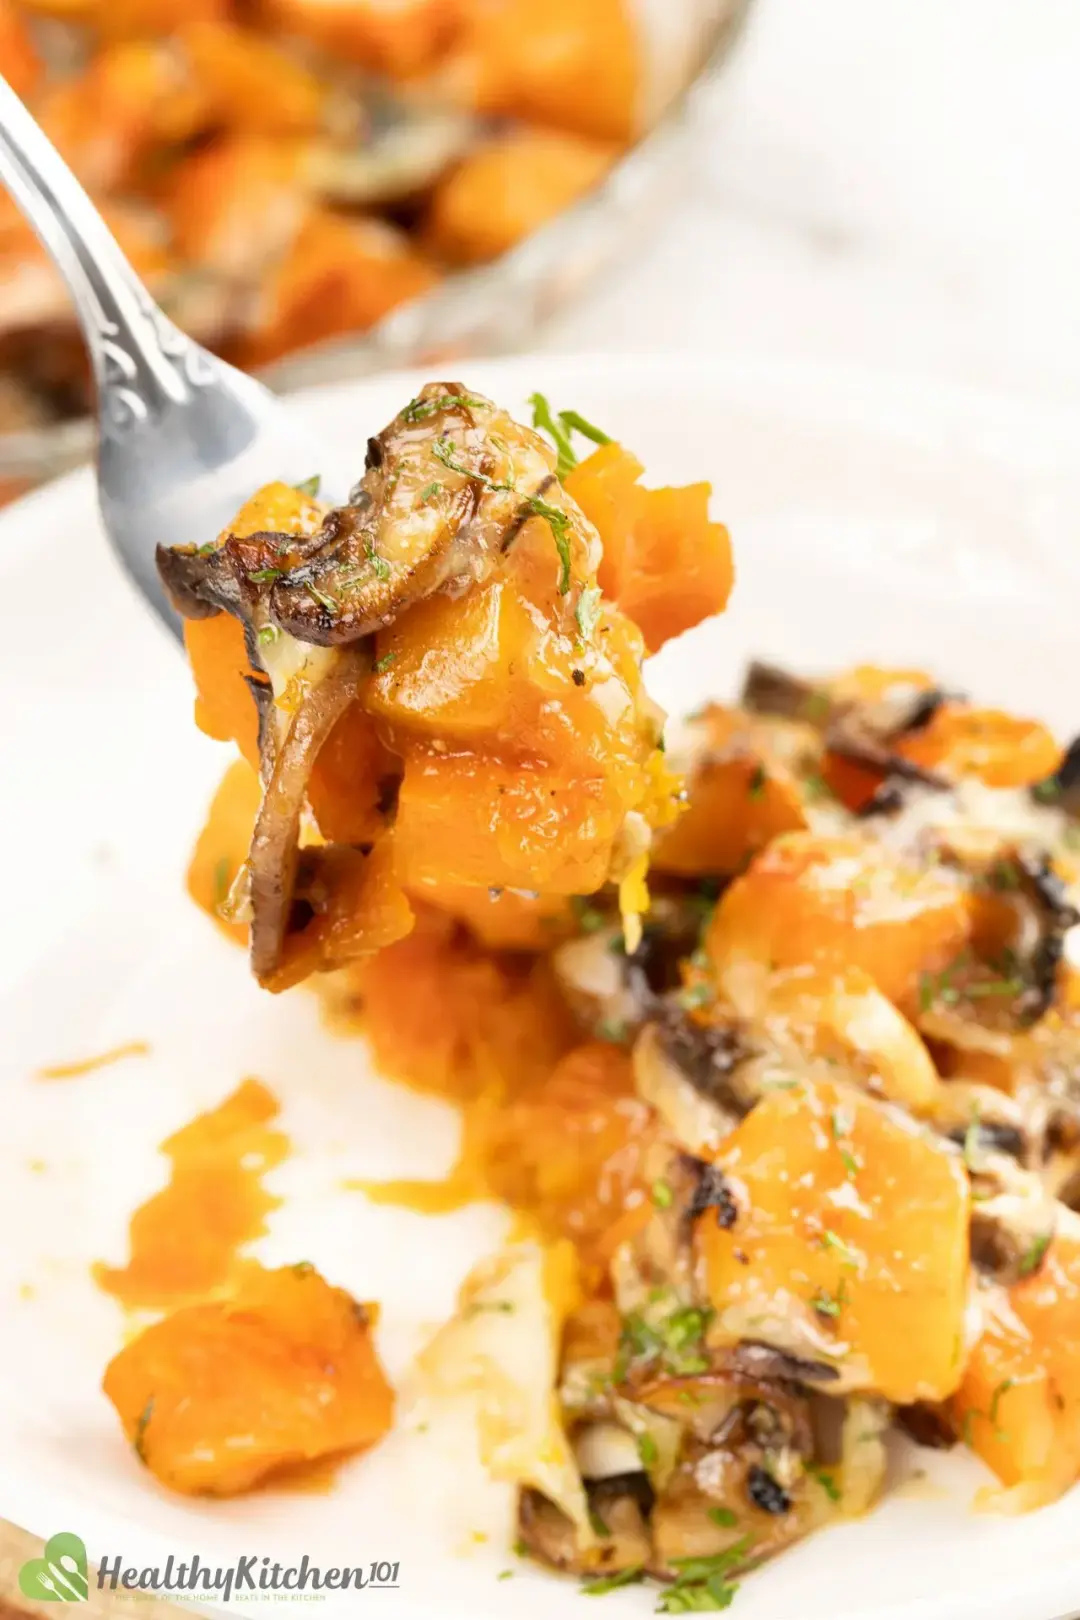  A fork holding pieces of roasted butternut squash and mushrooms, hovering over a dish of butternut squash casserole